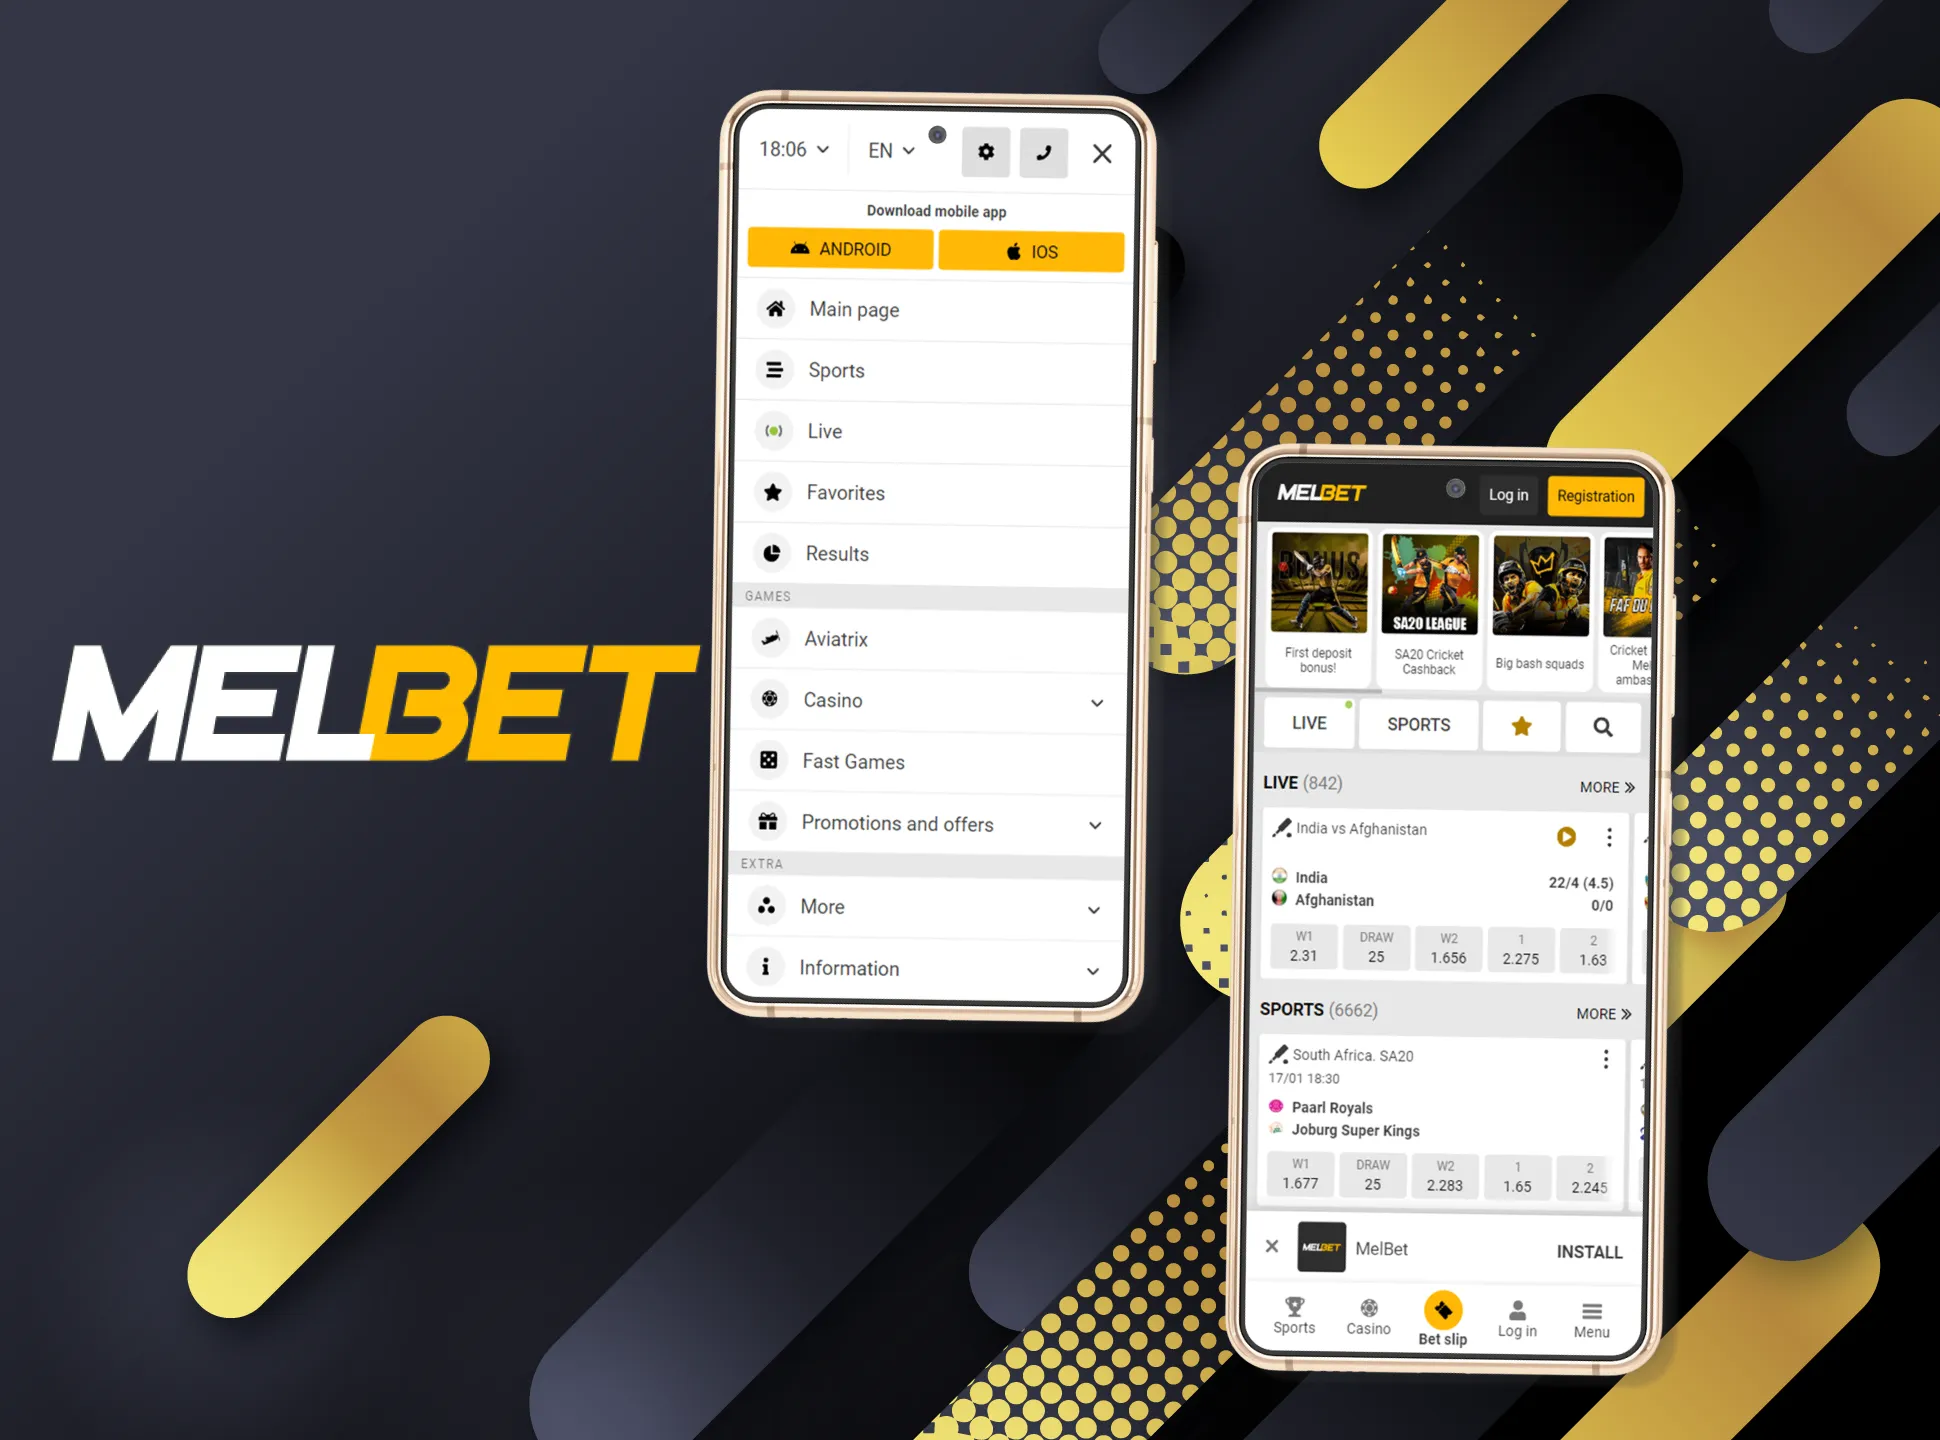 You can use the Melbet mobile version instead of the app.